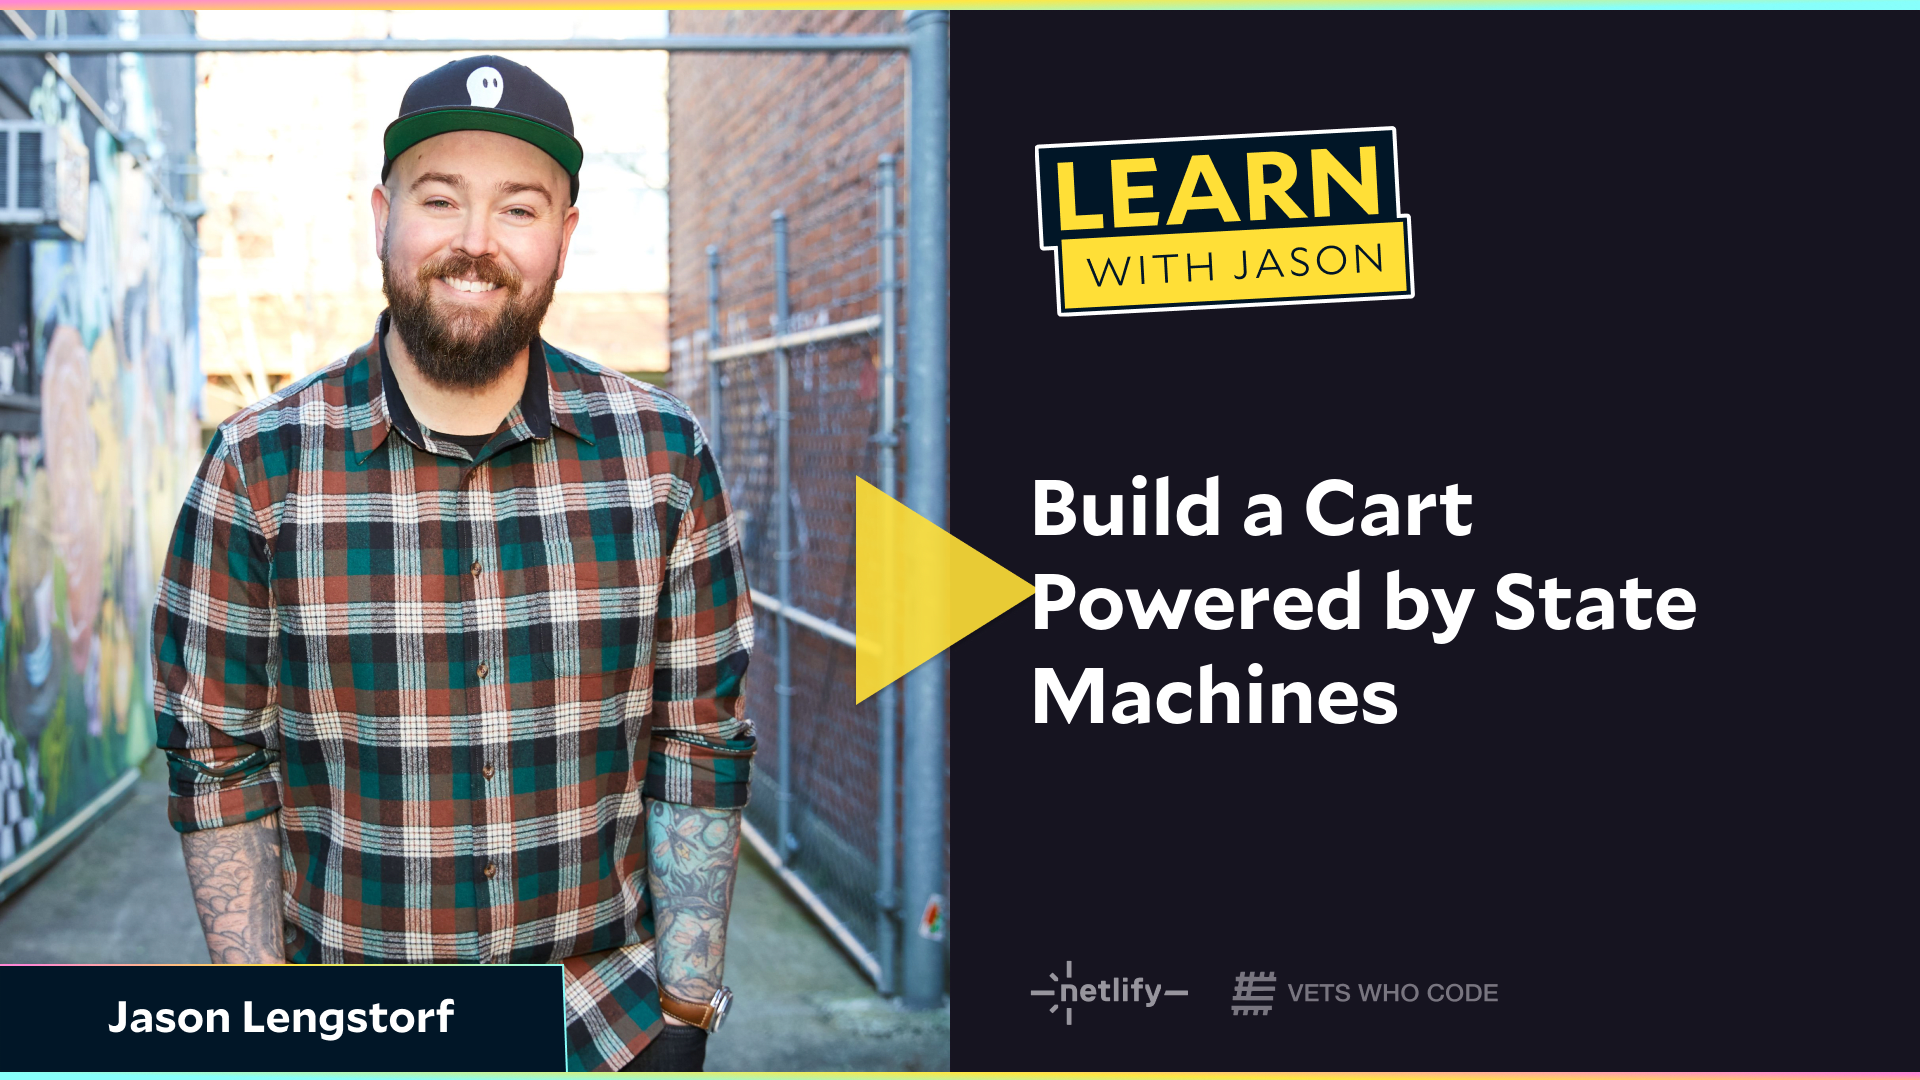 Build a Cart Powered by State Machines (with Jason Lengstorf)